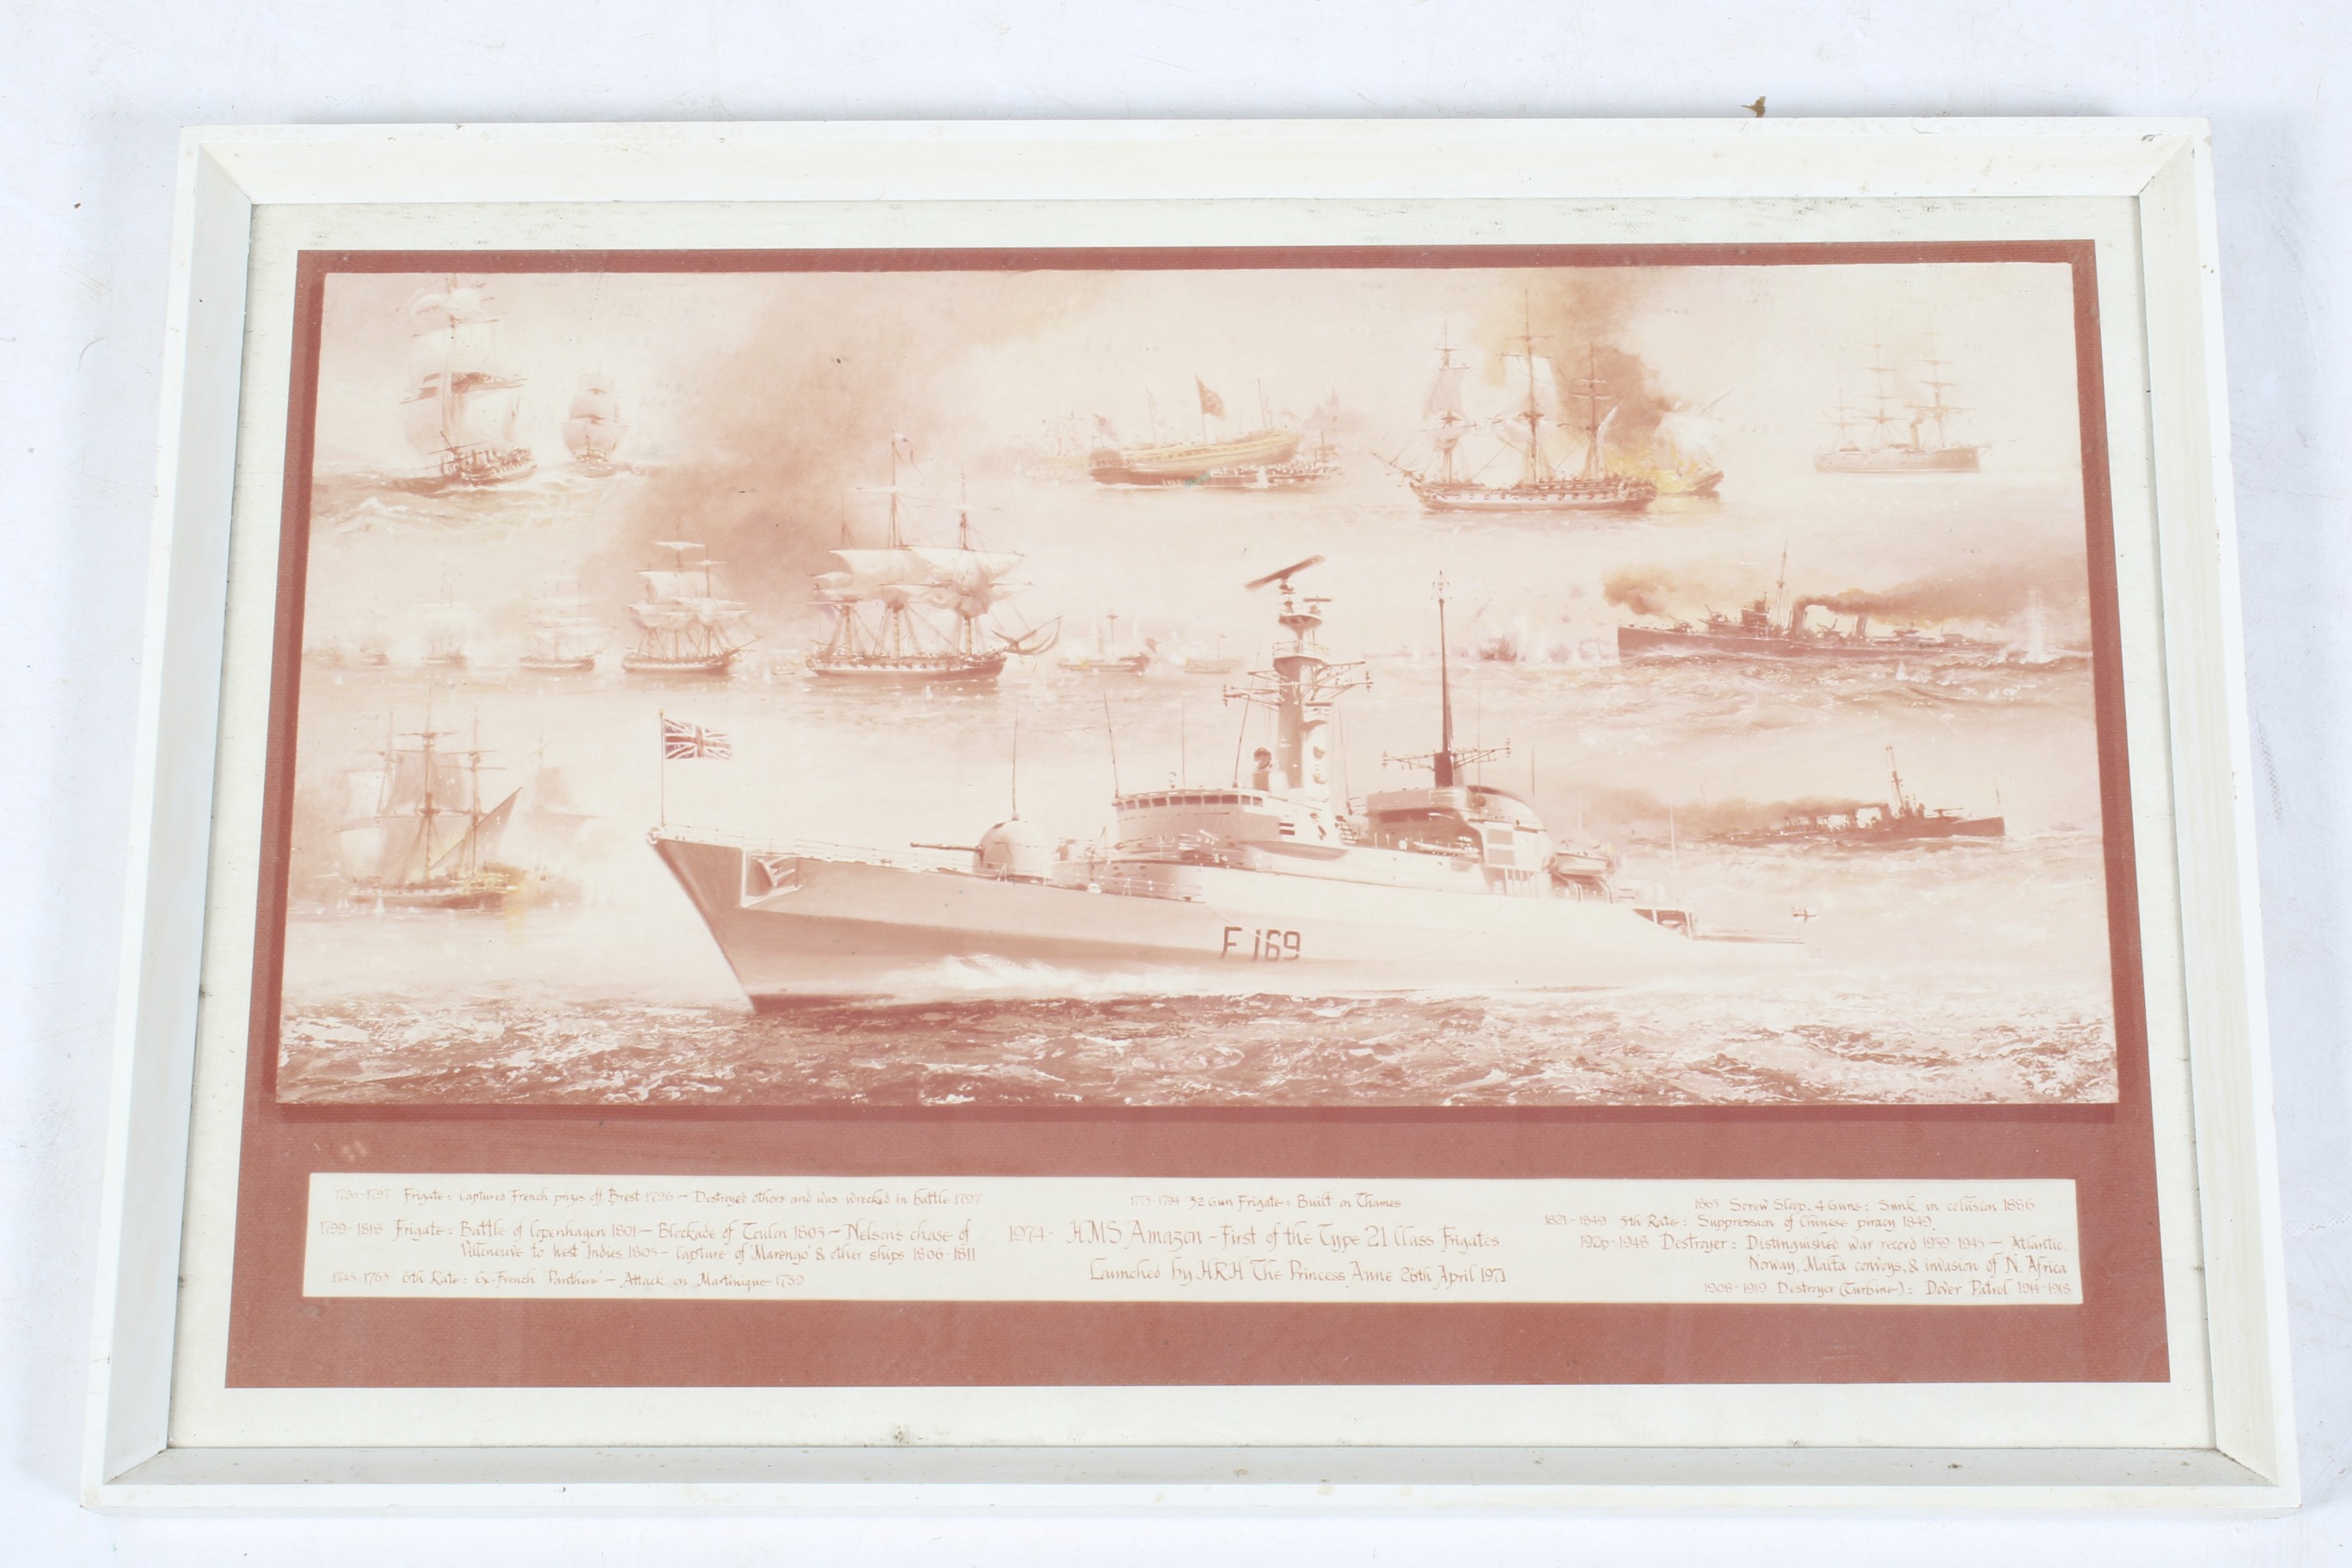 A vintage print of 'HMS Amazon'. Depicting multiple historical ships,